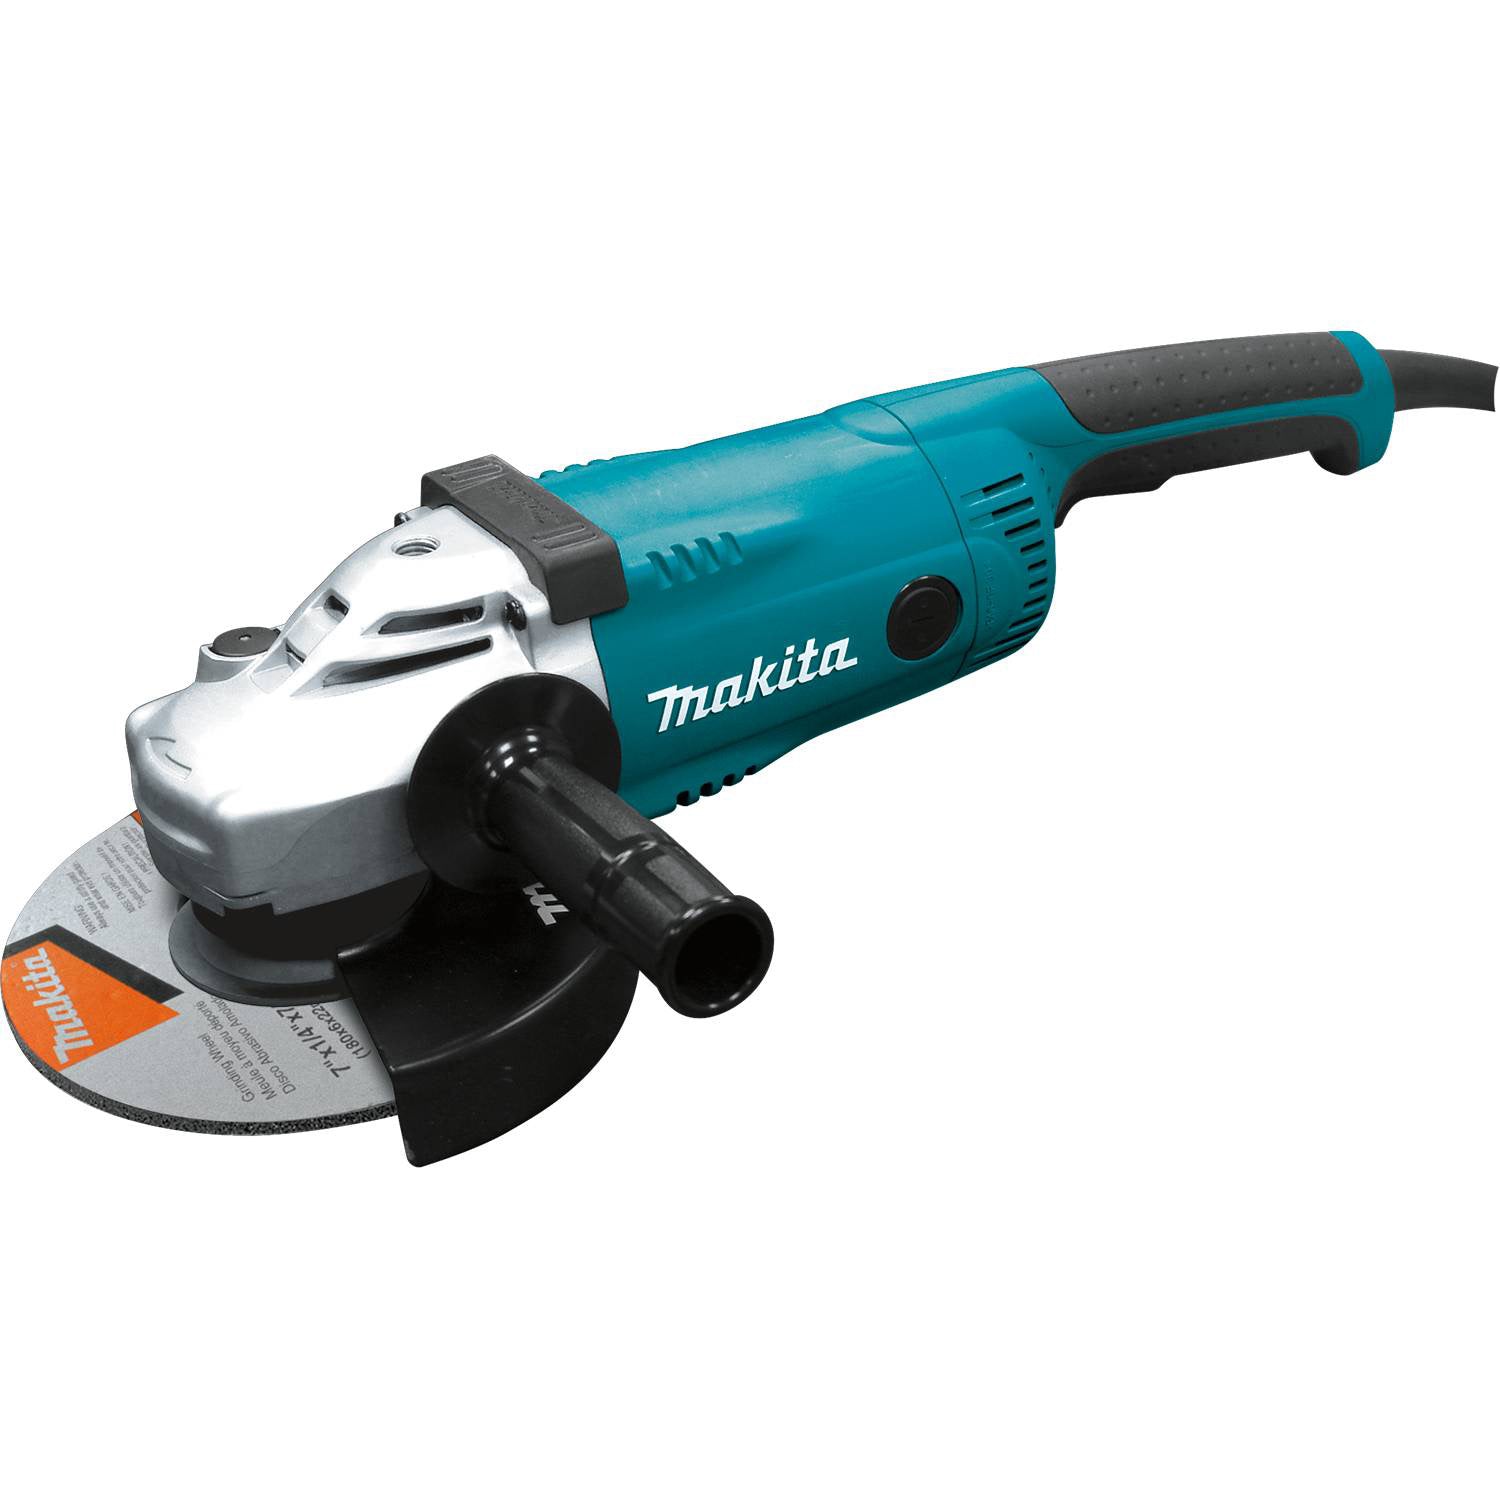 15 Amp 7" Angle Grinder with Tool-Less Adjustment